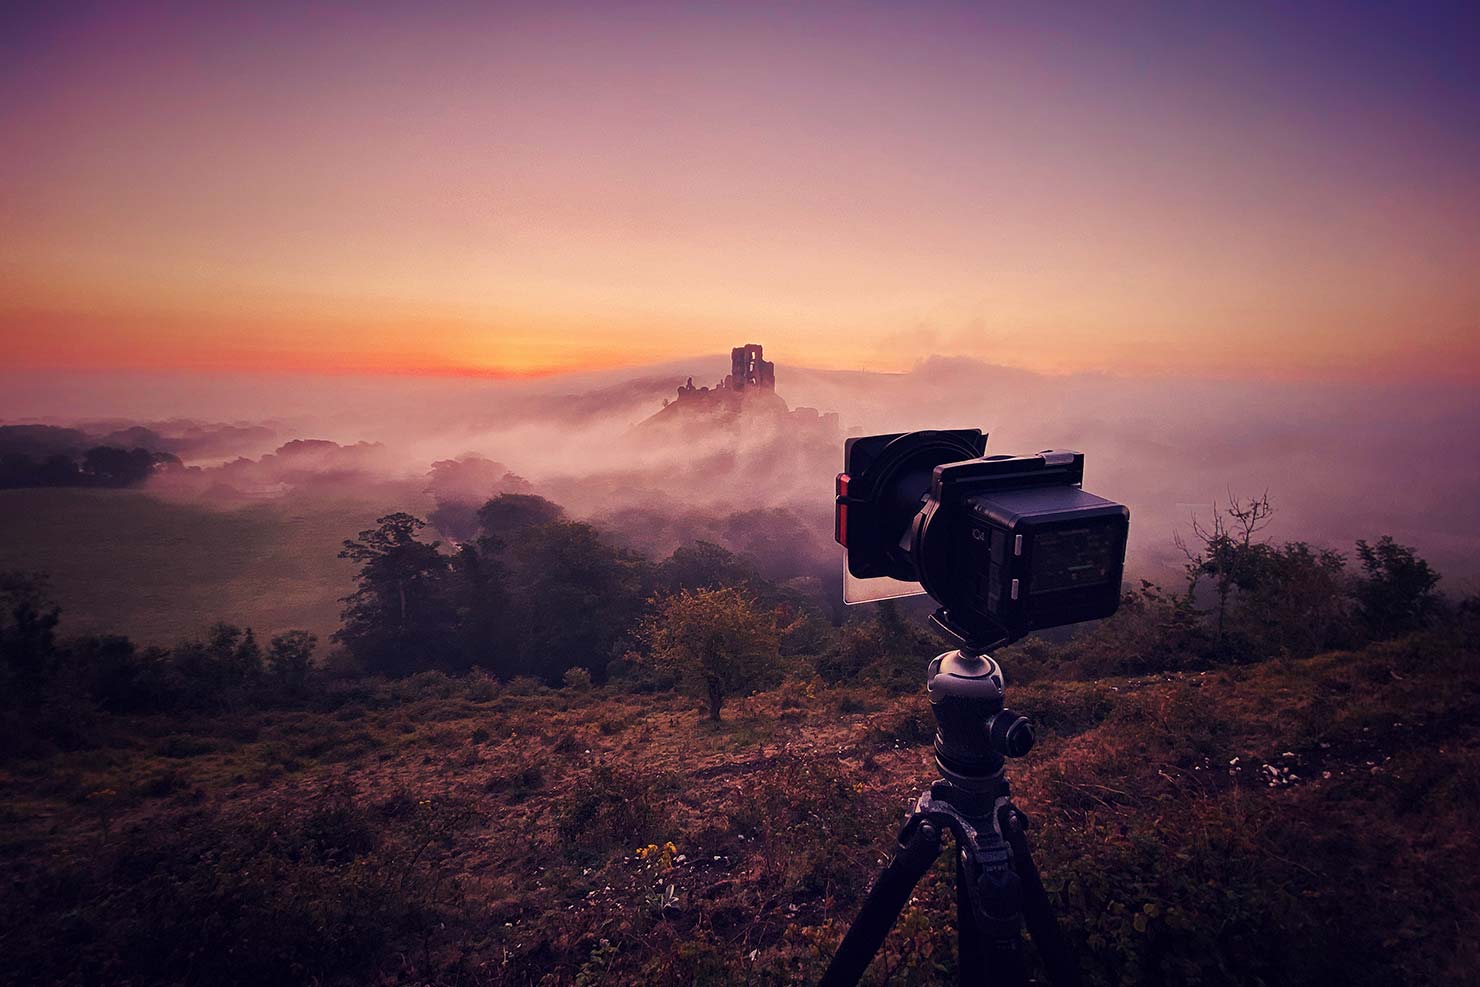 corfe castle bts behind scenes phase one xt dorset paul reiffer print story filming launch limited edition fine art mist